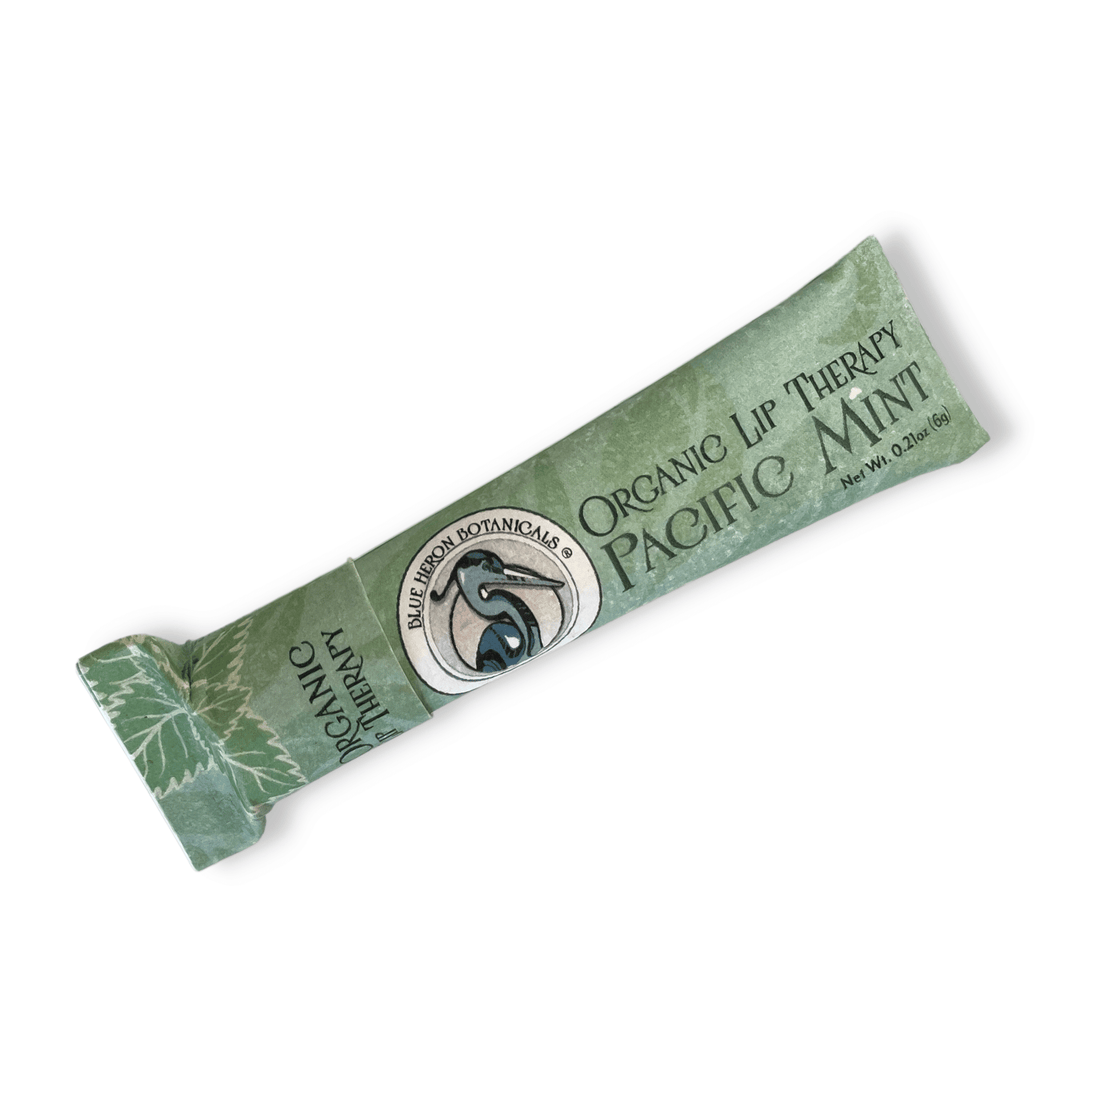 Blue Heron Botanicals Organic Lip Therapy Balm in Pacific Mint Formula. Shown in Plastic-Free, Cardboard Tube on White Background.